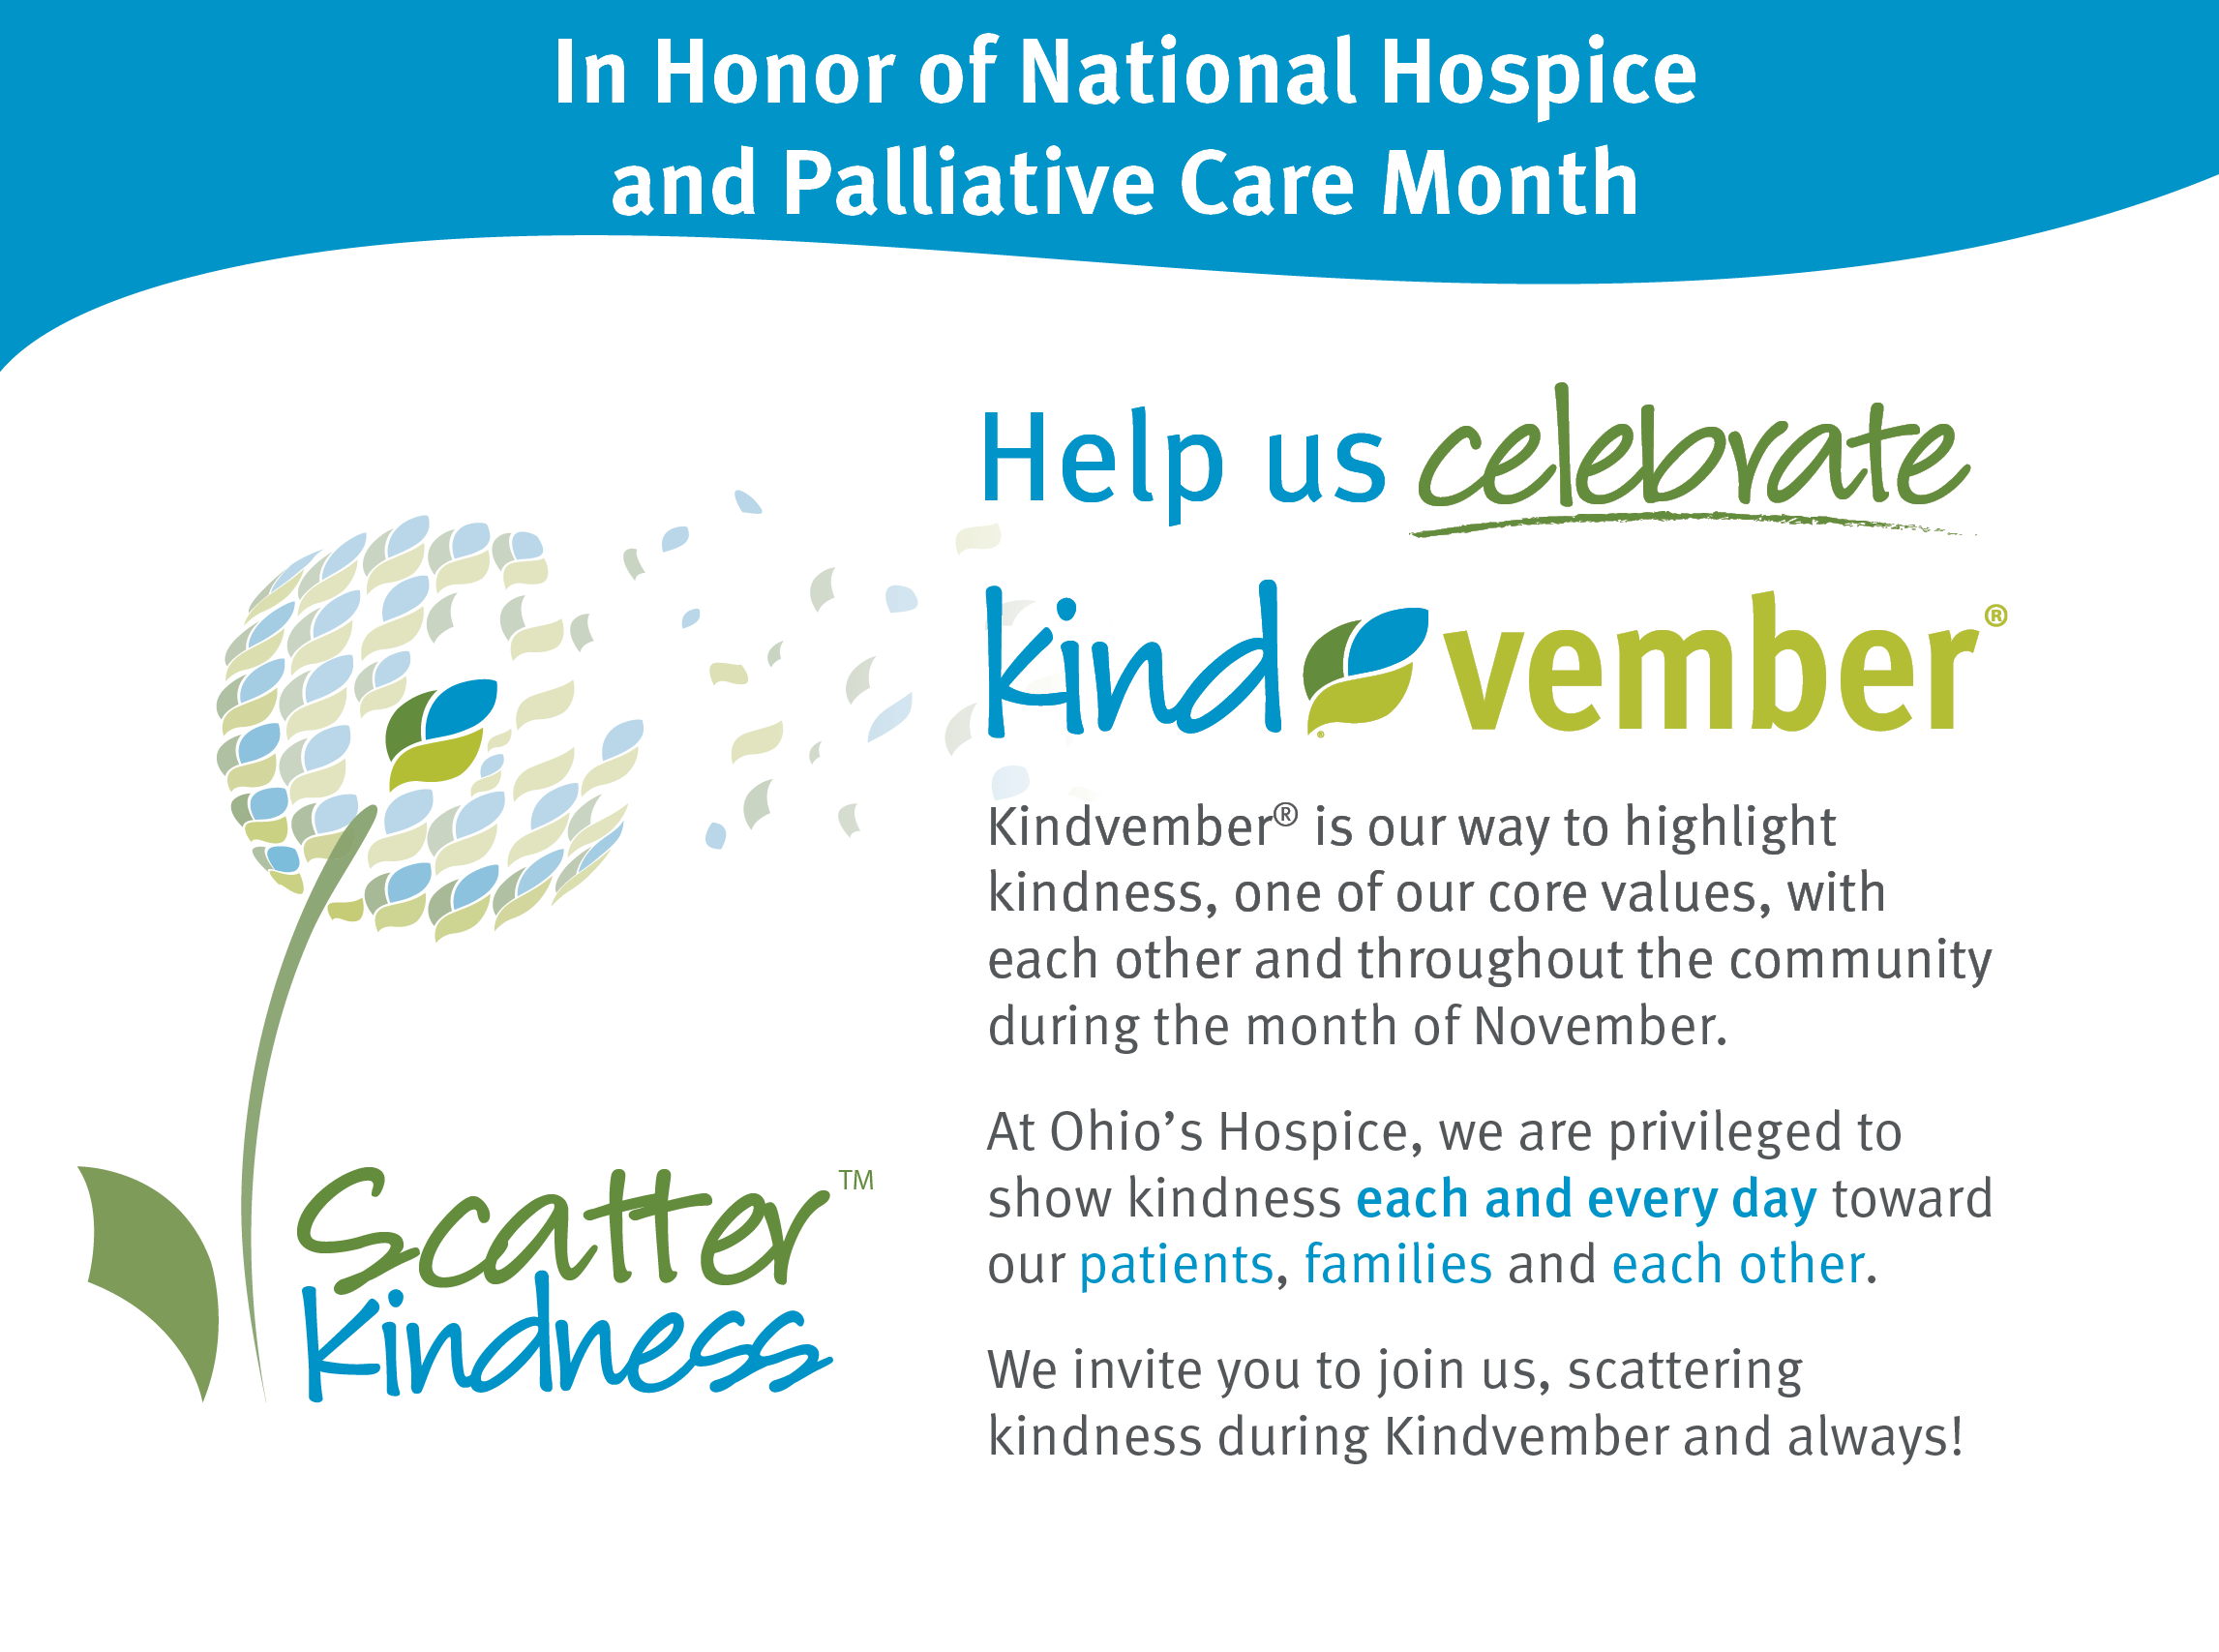 Help us celebrate Kindvember, a month to scatter kindness! | Ohio's Hospice